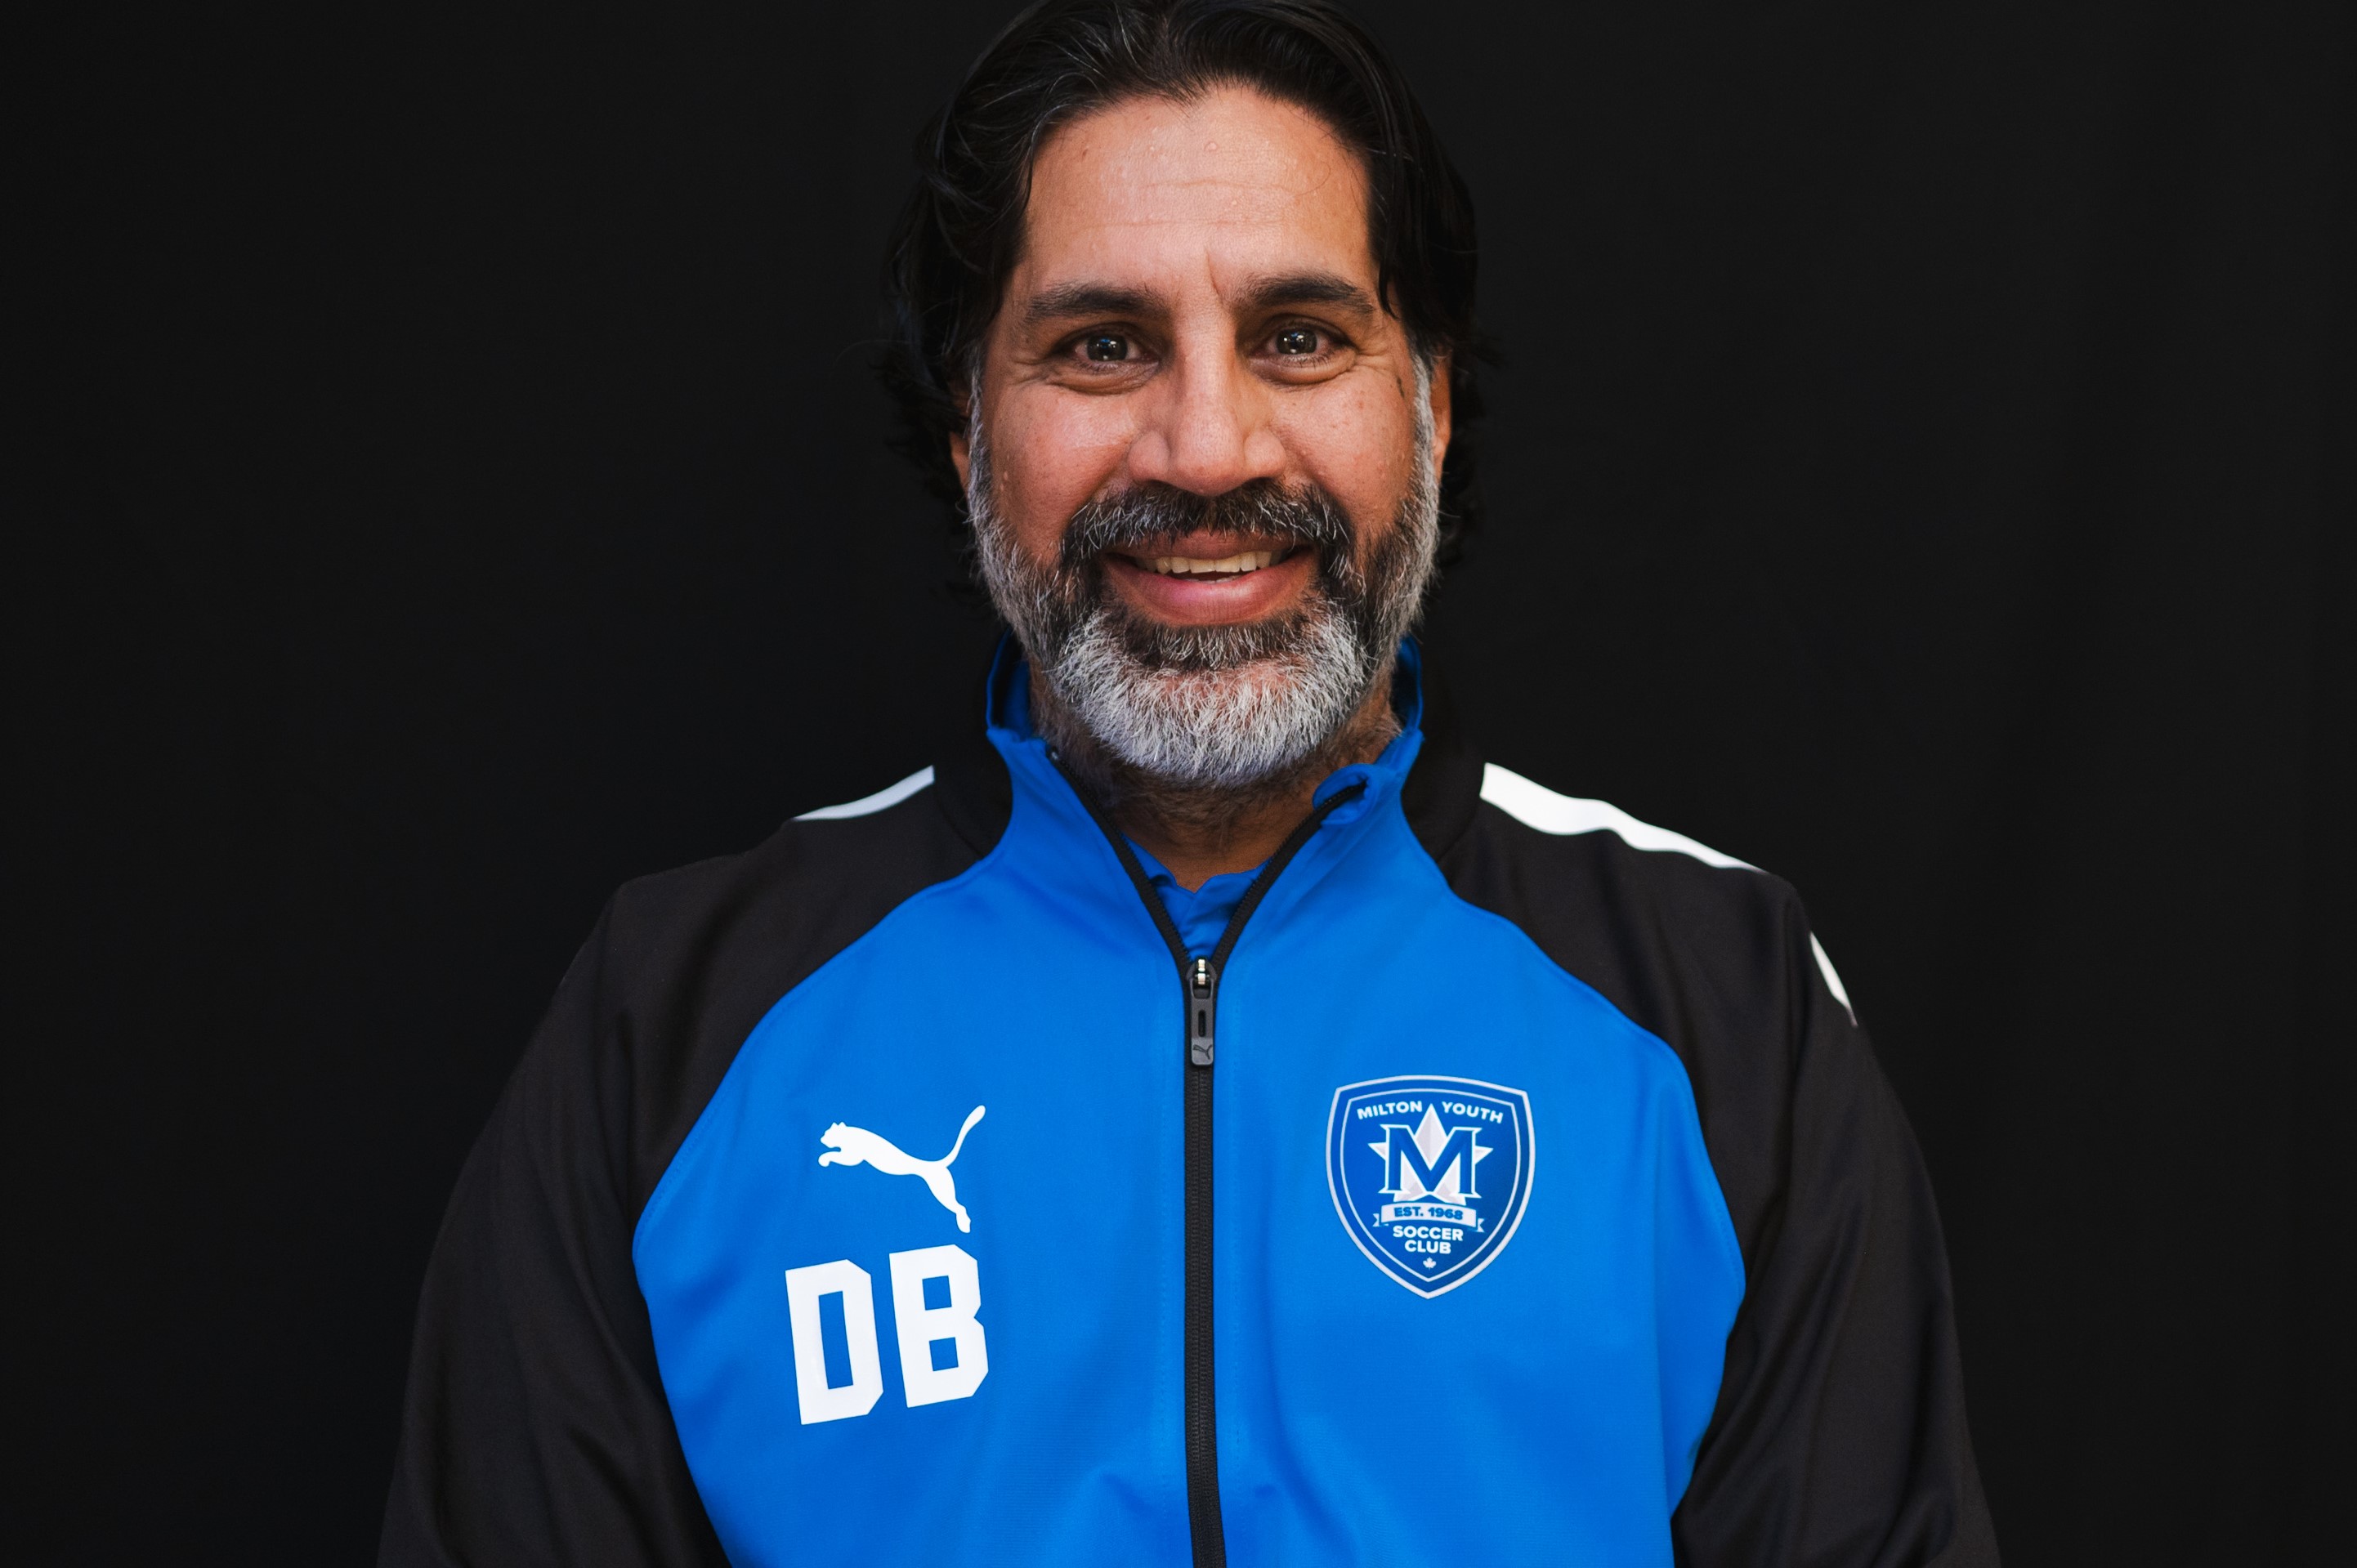 Milton Youth Soccer Appoints David Benning as Director of Soccer Operations featured image